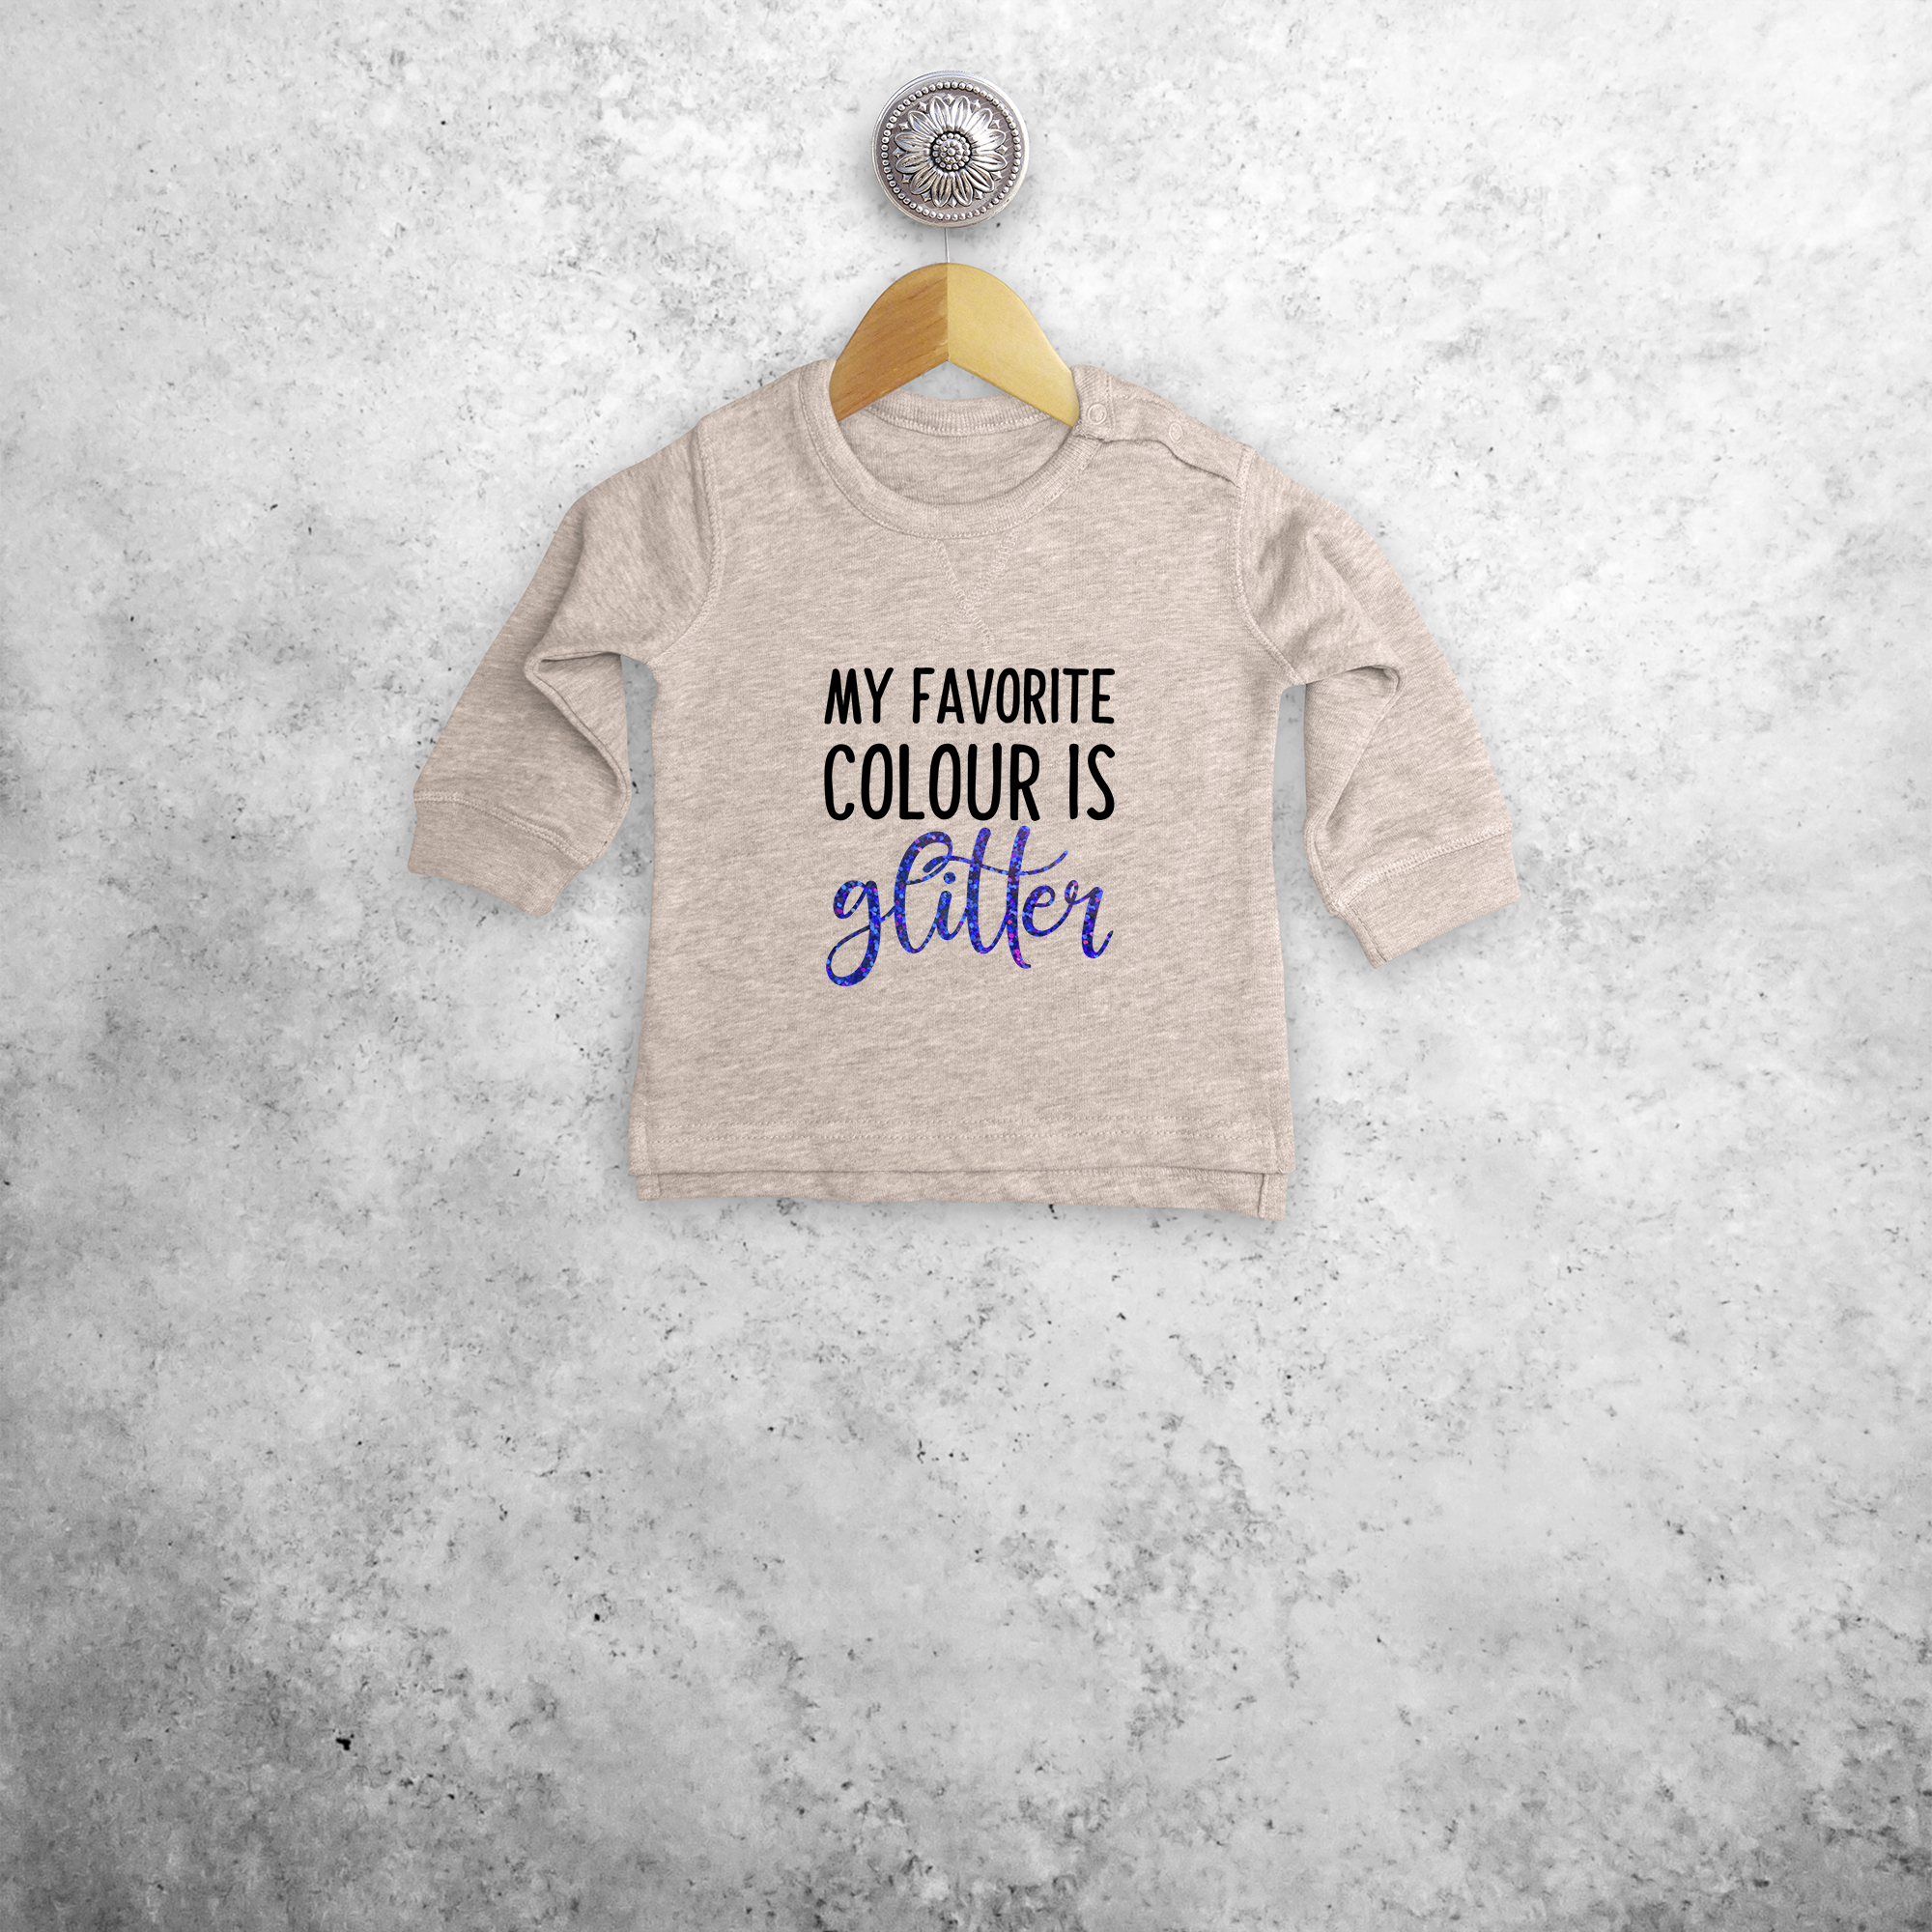 'My favorite colour is glitter' baby sweater